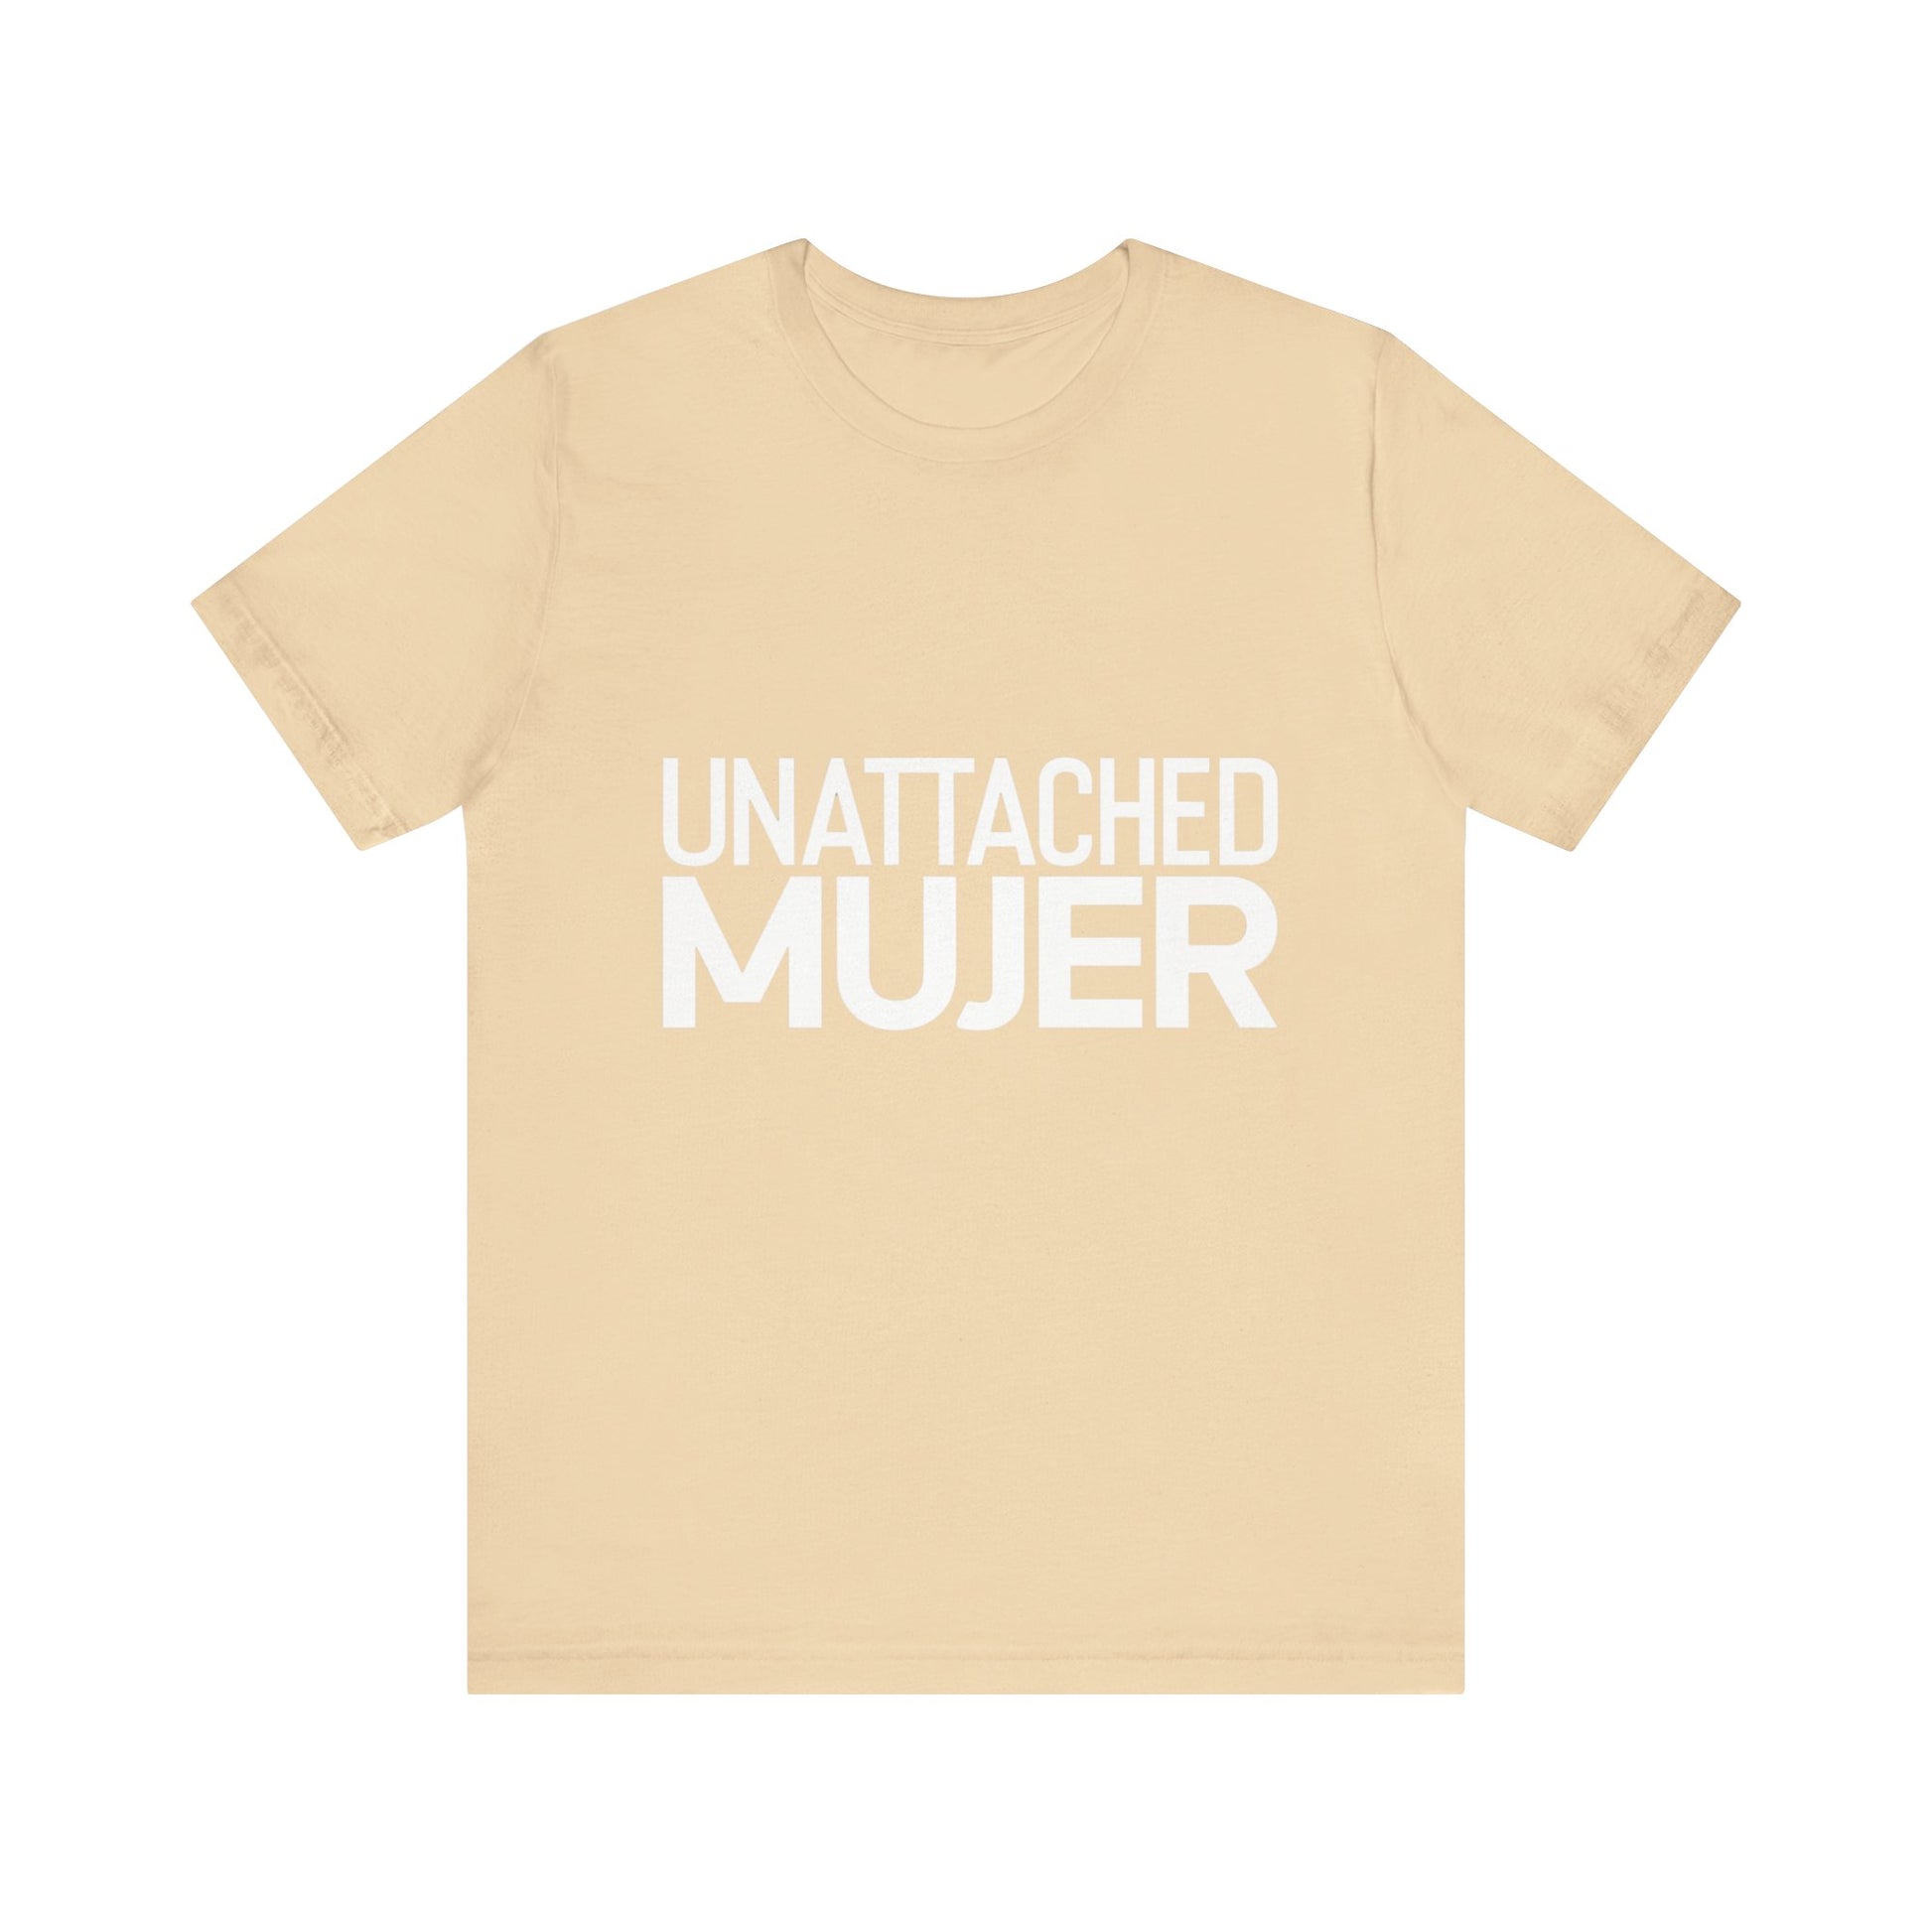 Unattached Mujer Jersey Short Sleeve Tee For Women - EvoFash 